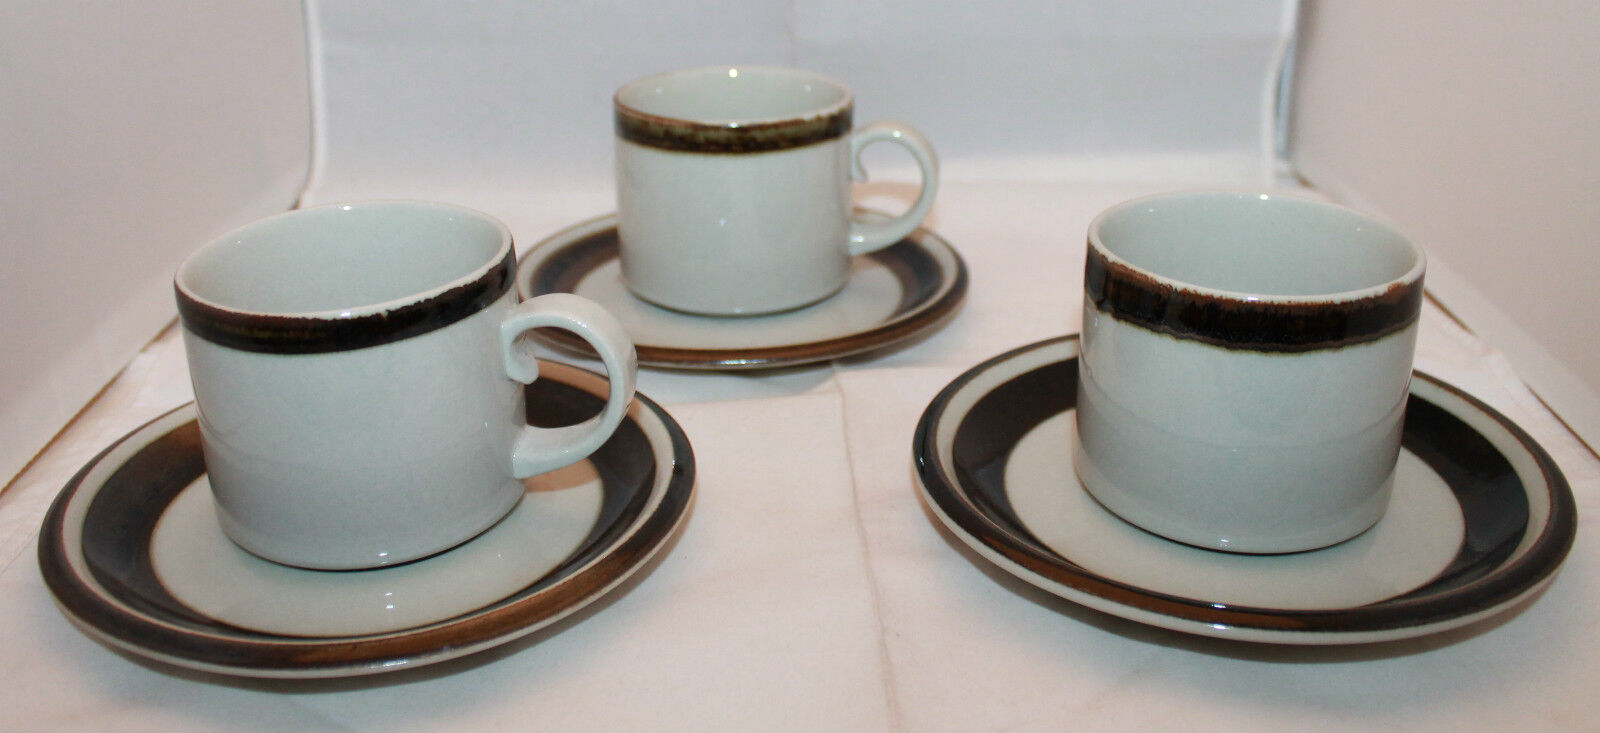 Read more about the article Arabia Finland Set of 3 Karelia Coffee Tea Cups Saucers Anja Jaatinen-Winqvist　